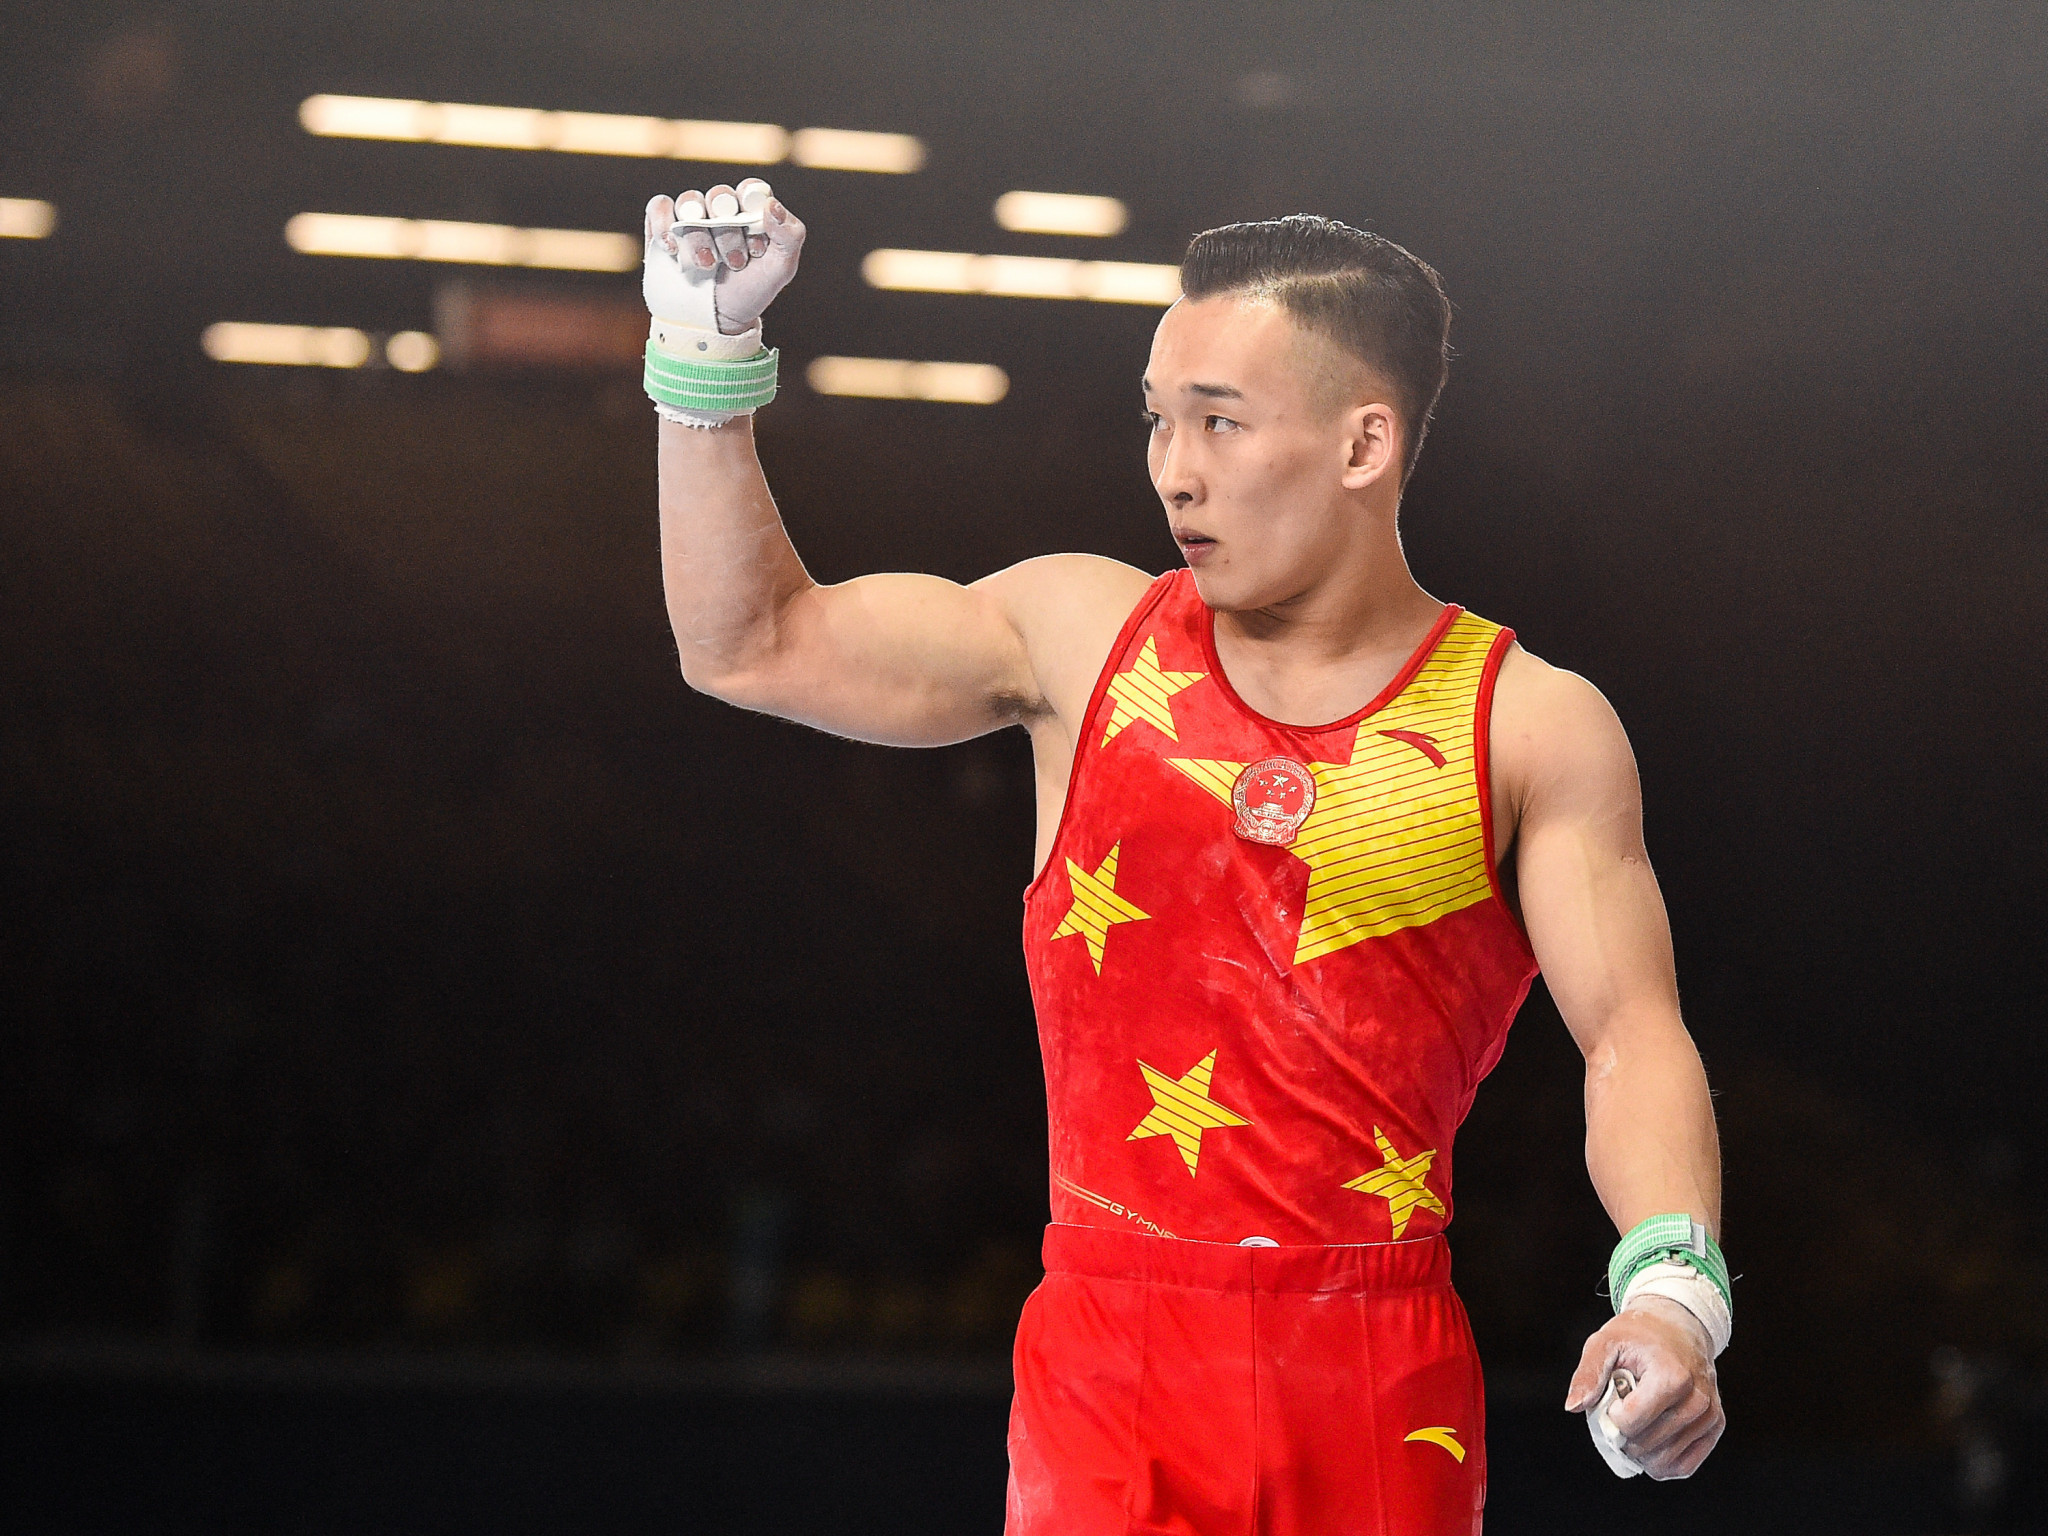 China's Xiao claims men's all-around title in thrilling final at Artistic Gymnastics World Championships